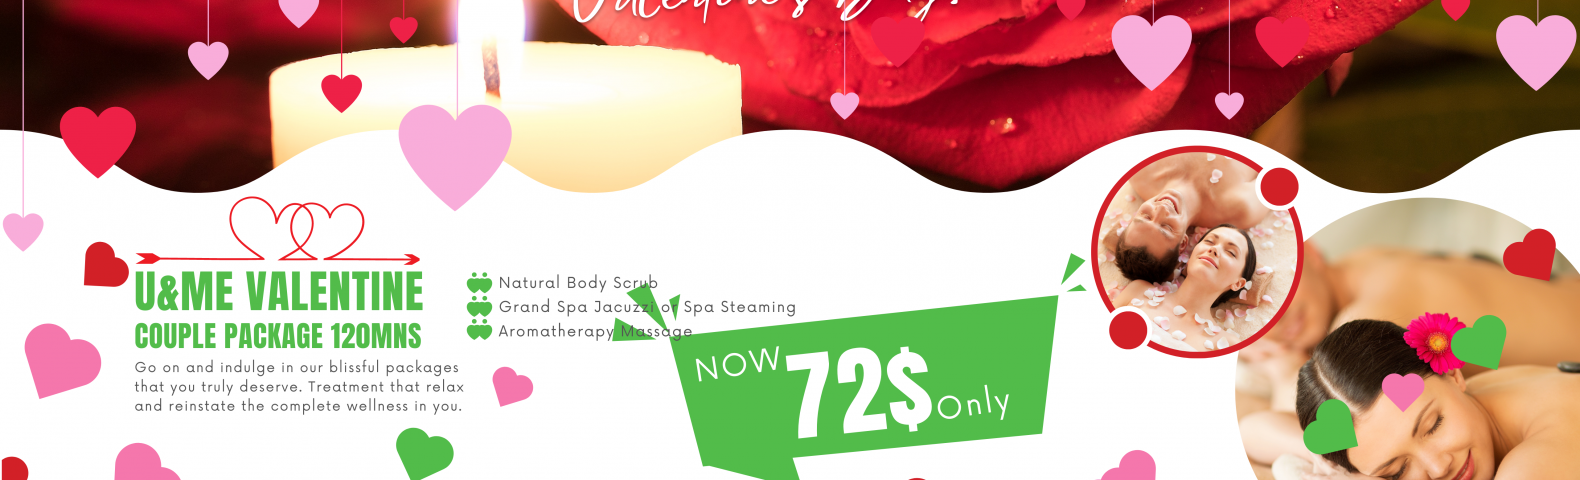 Red and Pink Festive Happy Valentine Day Flyer (A3 Document) (1080 × 1080 px) (Facebook Cover)